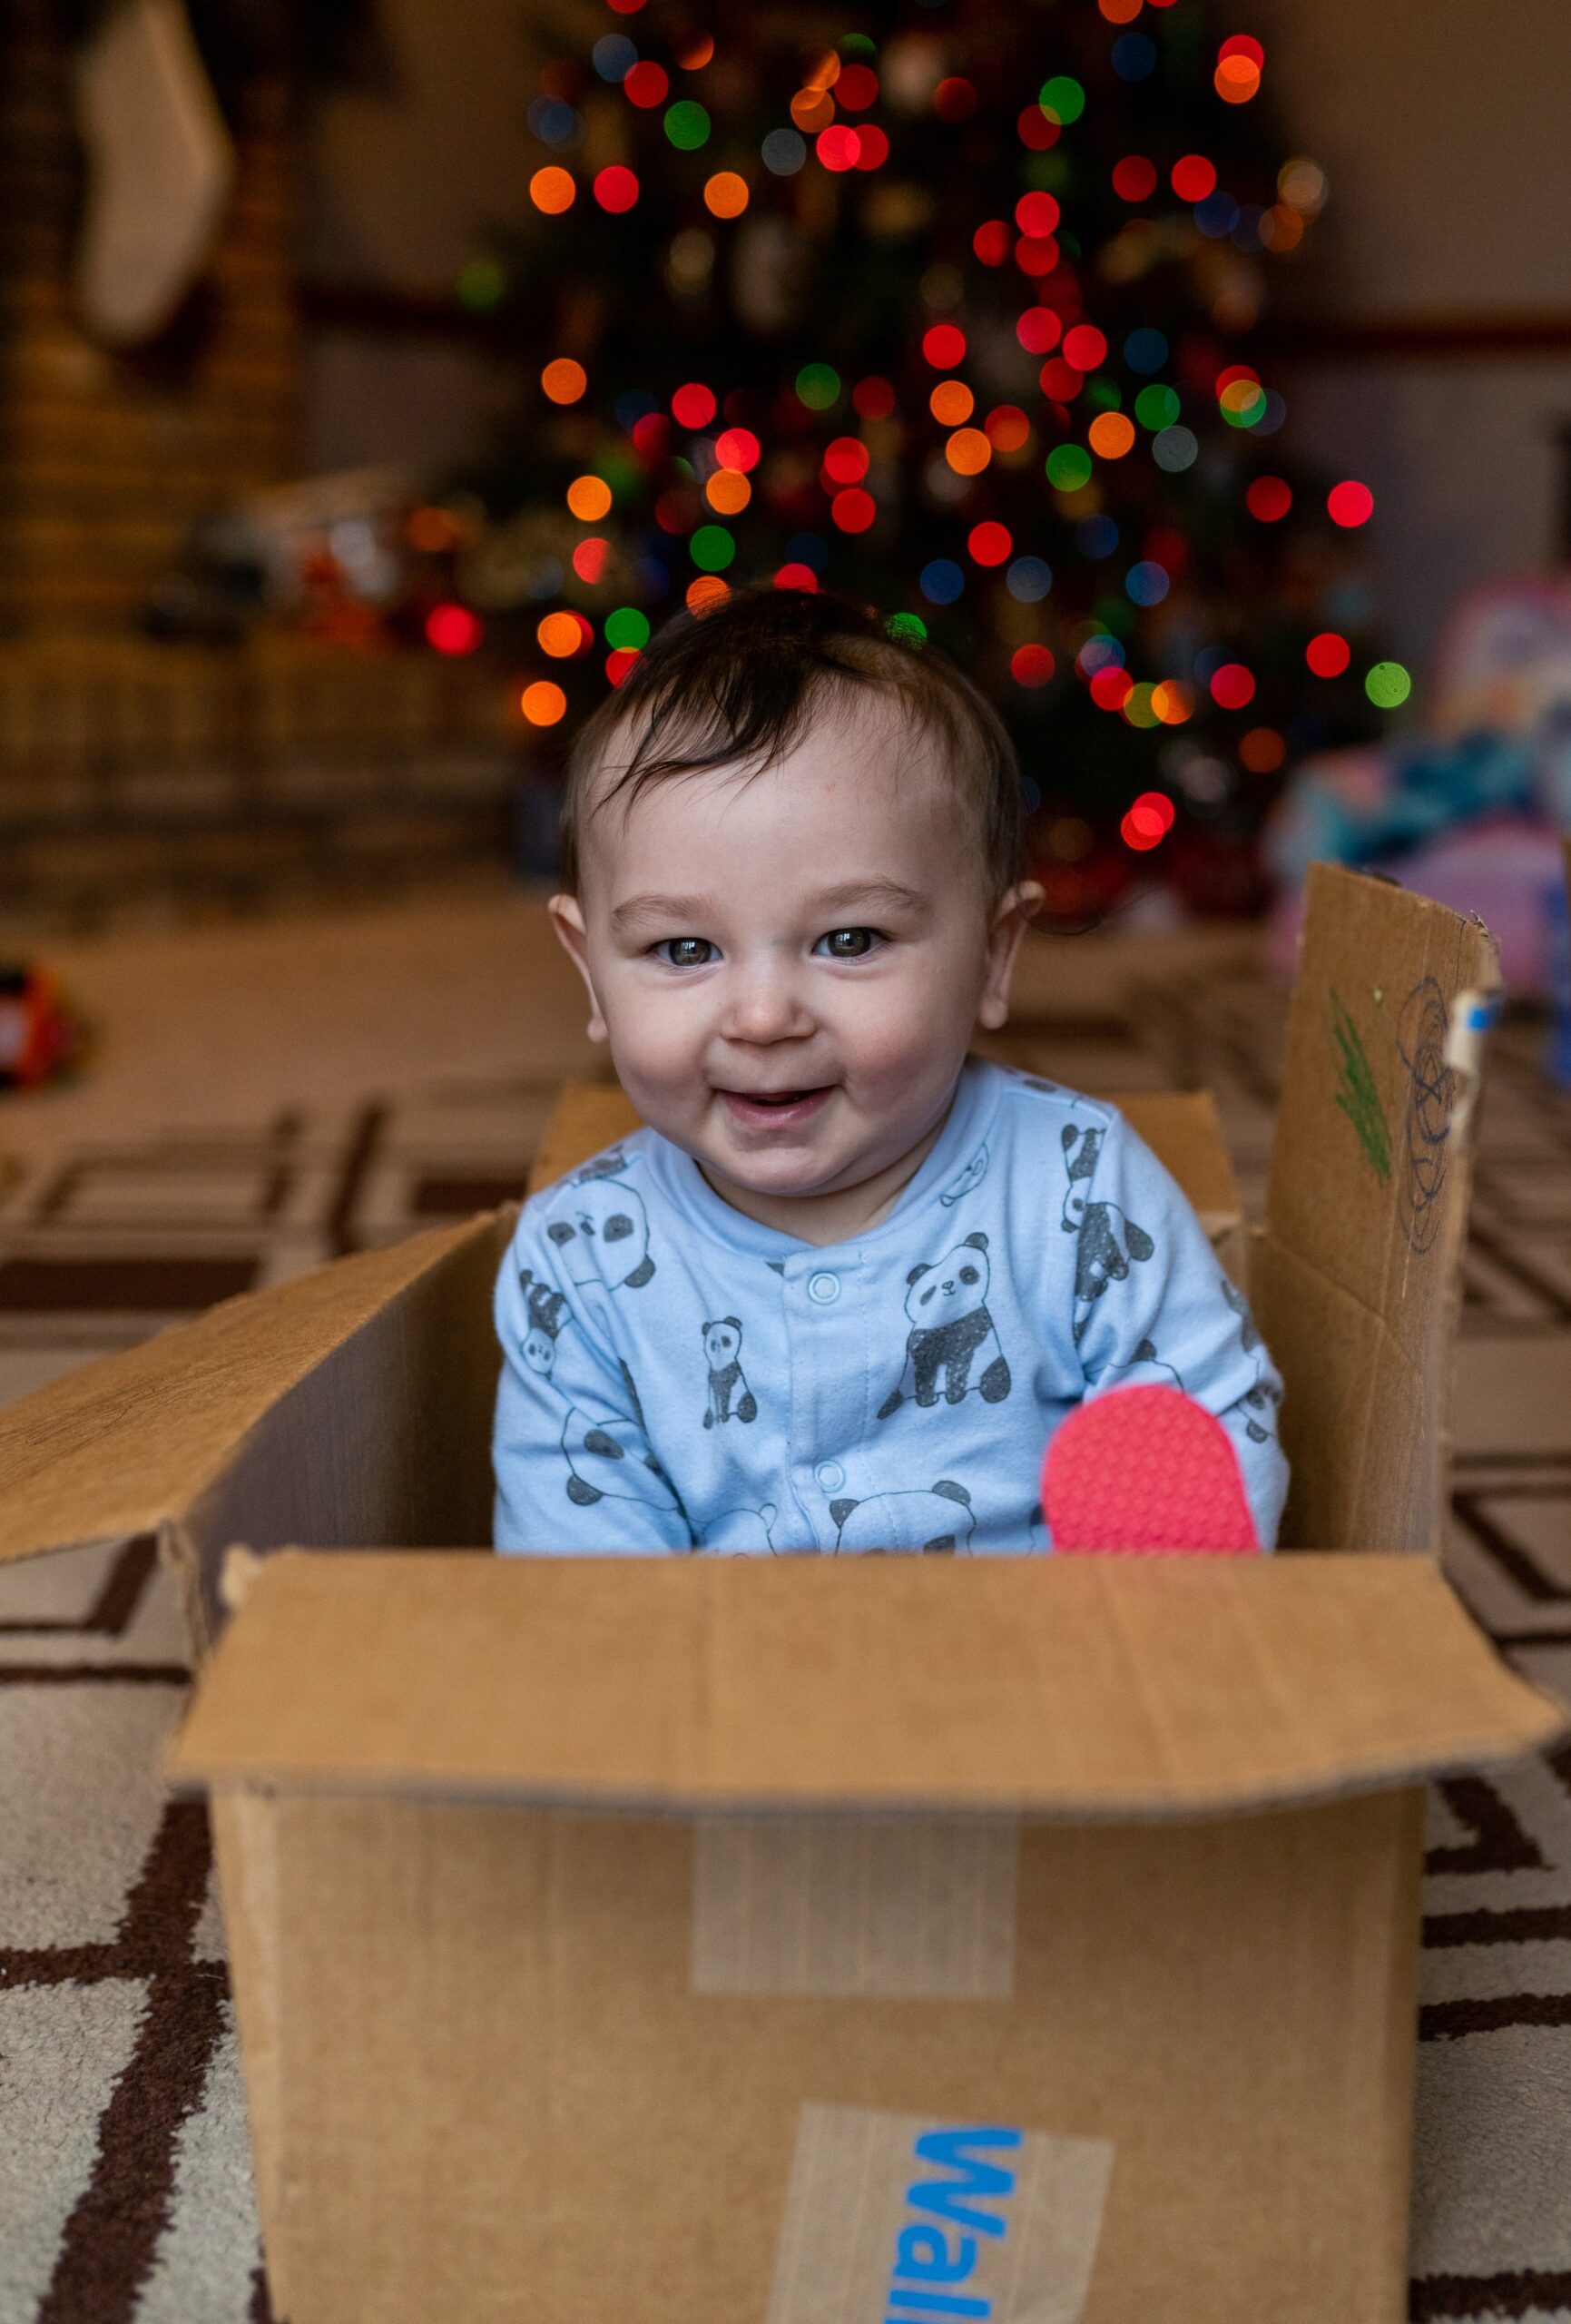 little boy in blue panda pajamas sitting in a box smiling at the camera with a lit christmas tree behind him 